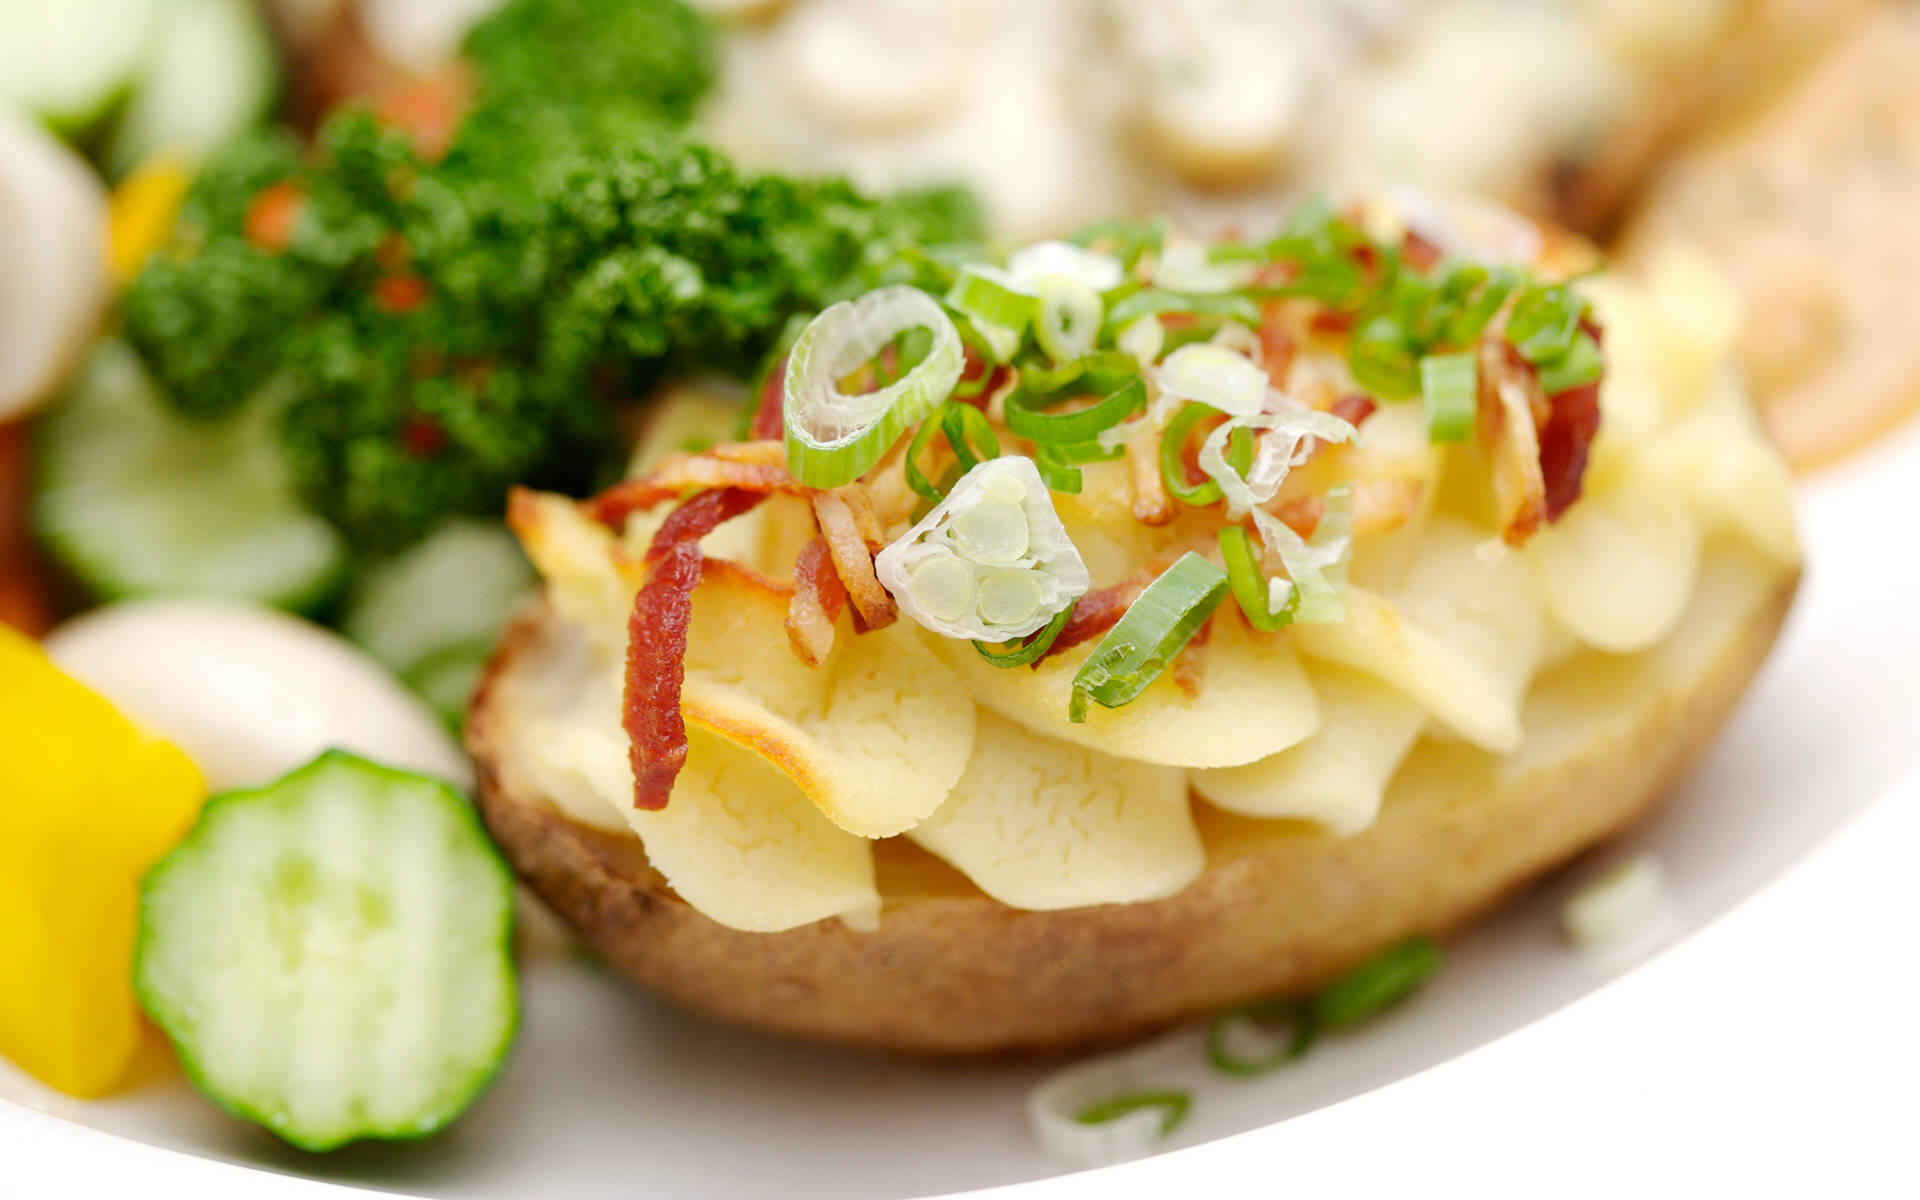 Baked Potato Dish With Endive Vegetables Wallpaper